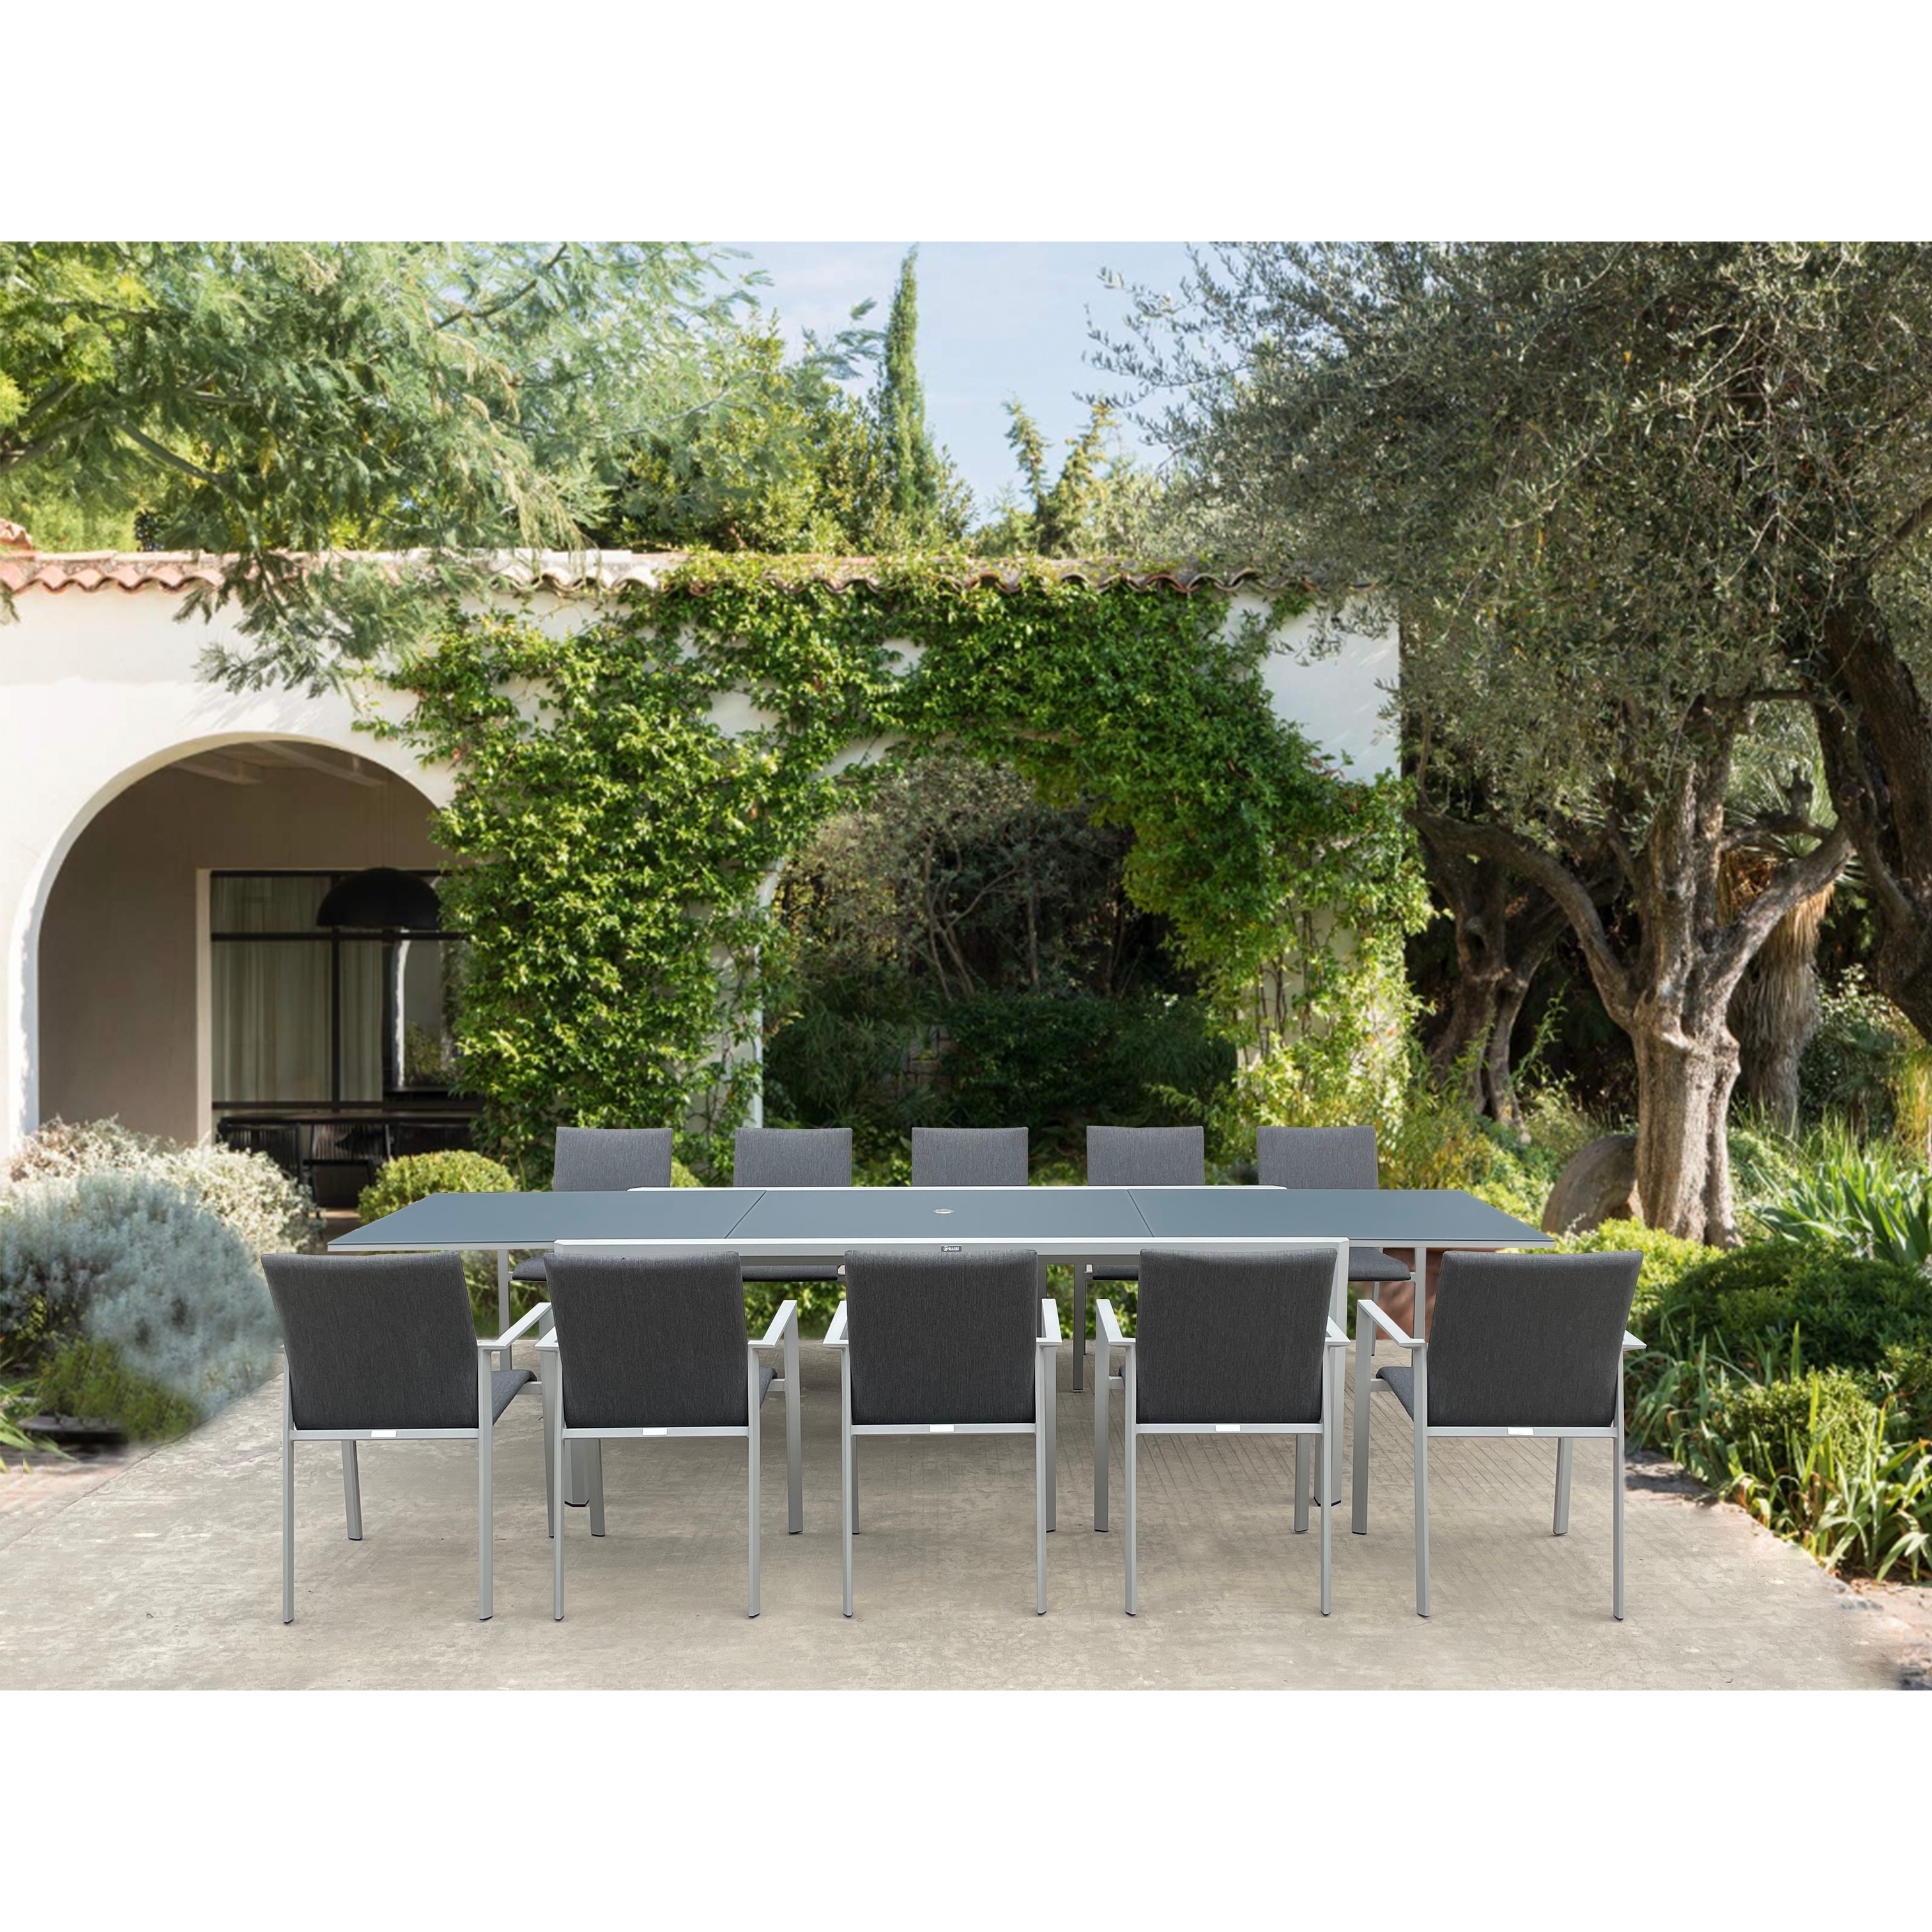 Luzzi Light Grey 11-piece Aluminum Outdoor Dining Set With Sling Set In Midnight Grey - N/a